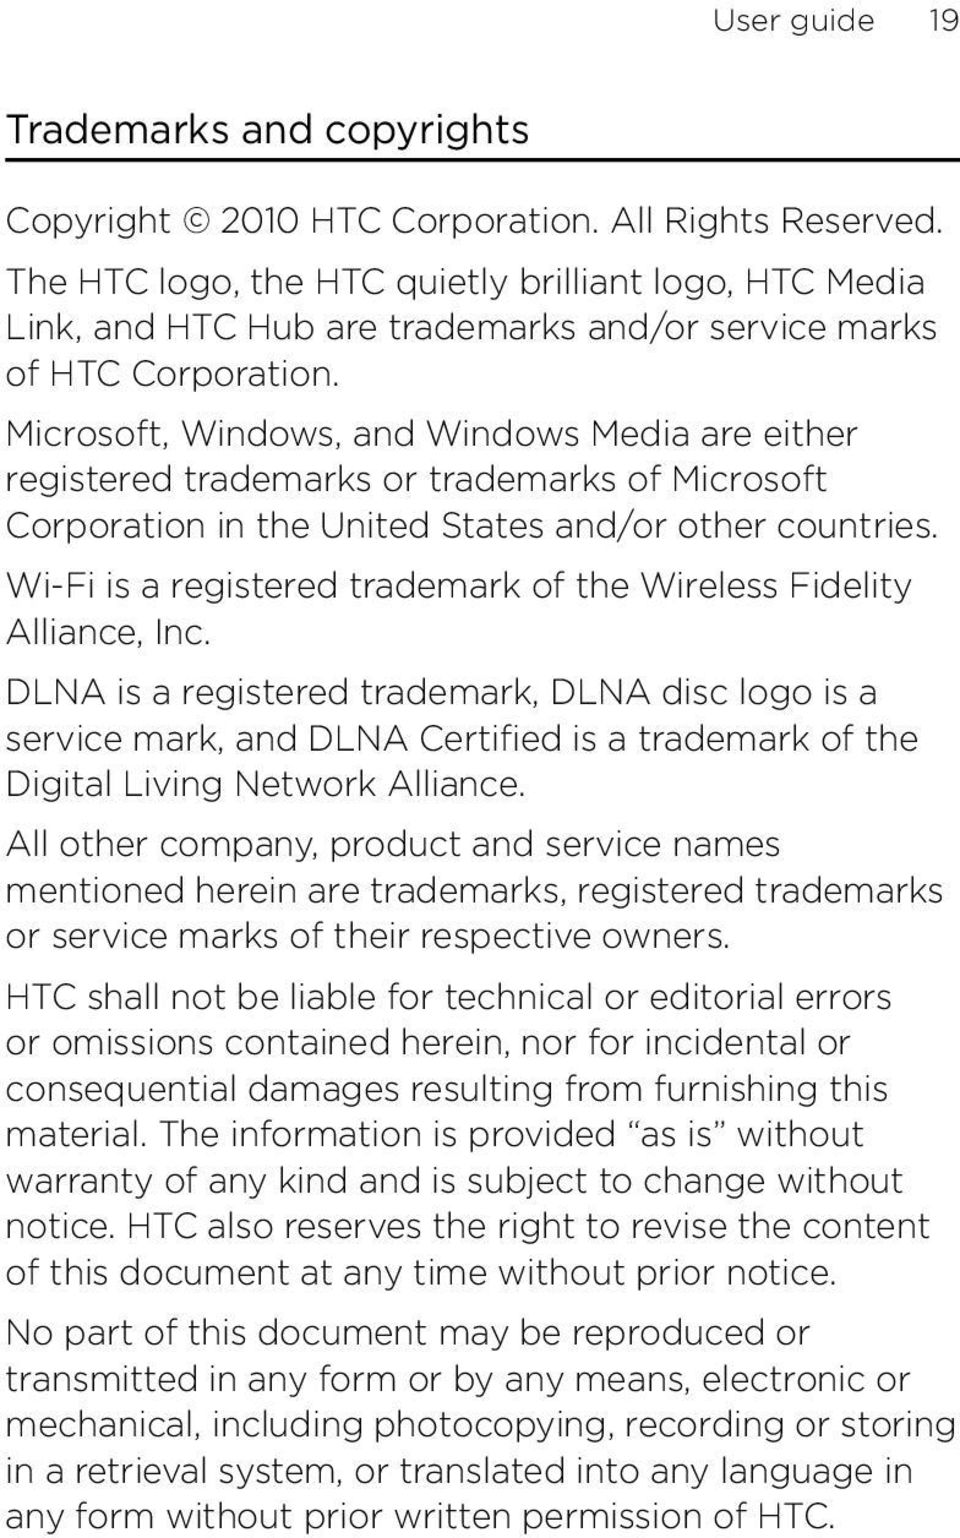 Microsoft, Windows, and Windows Media are either registered trademarks or trademarks of Microsoft Corporation in the United States and/or other countries.